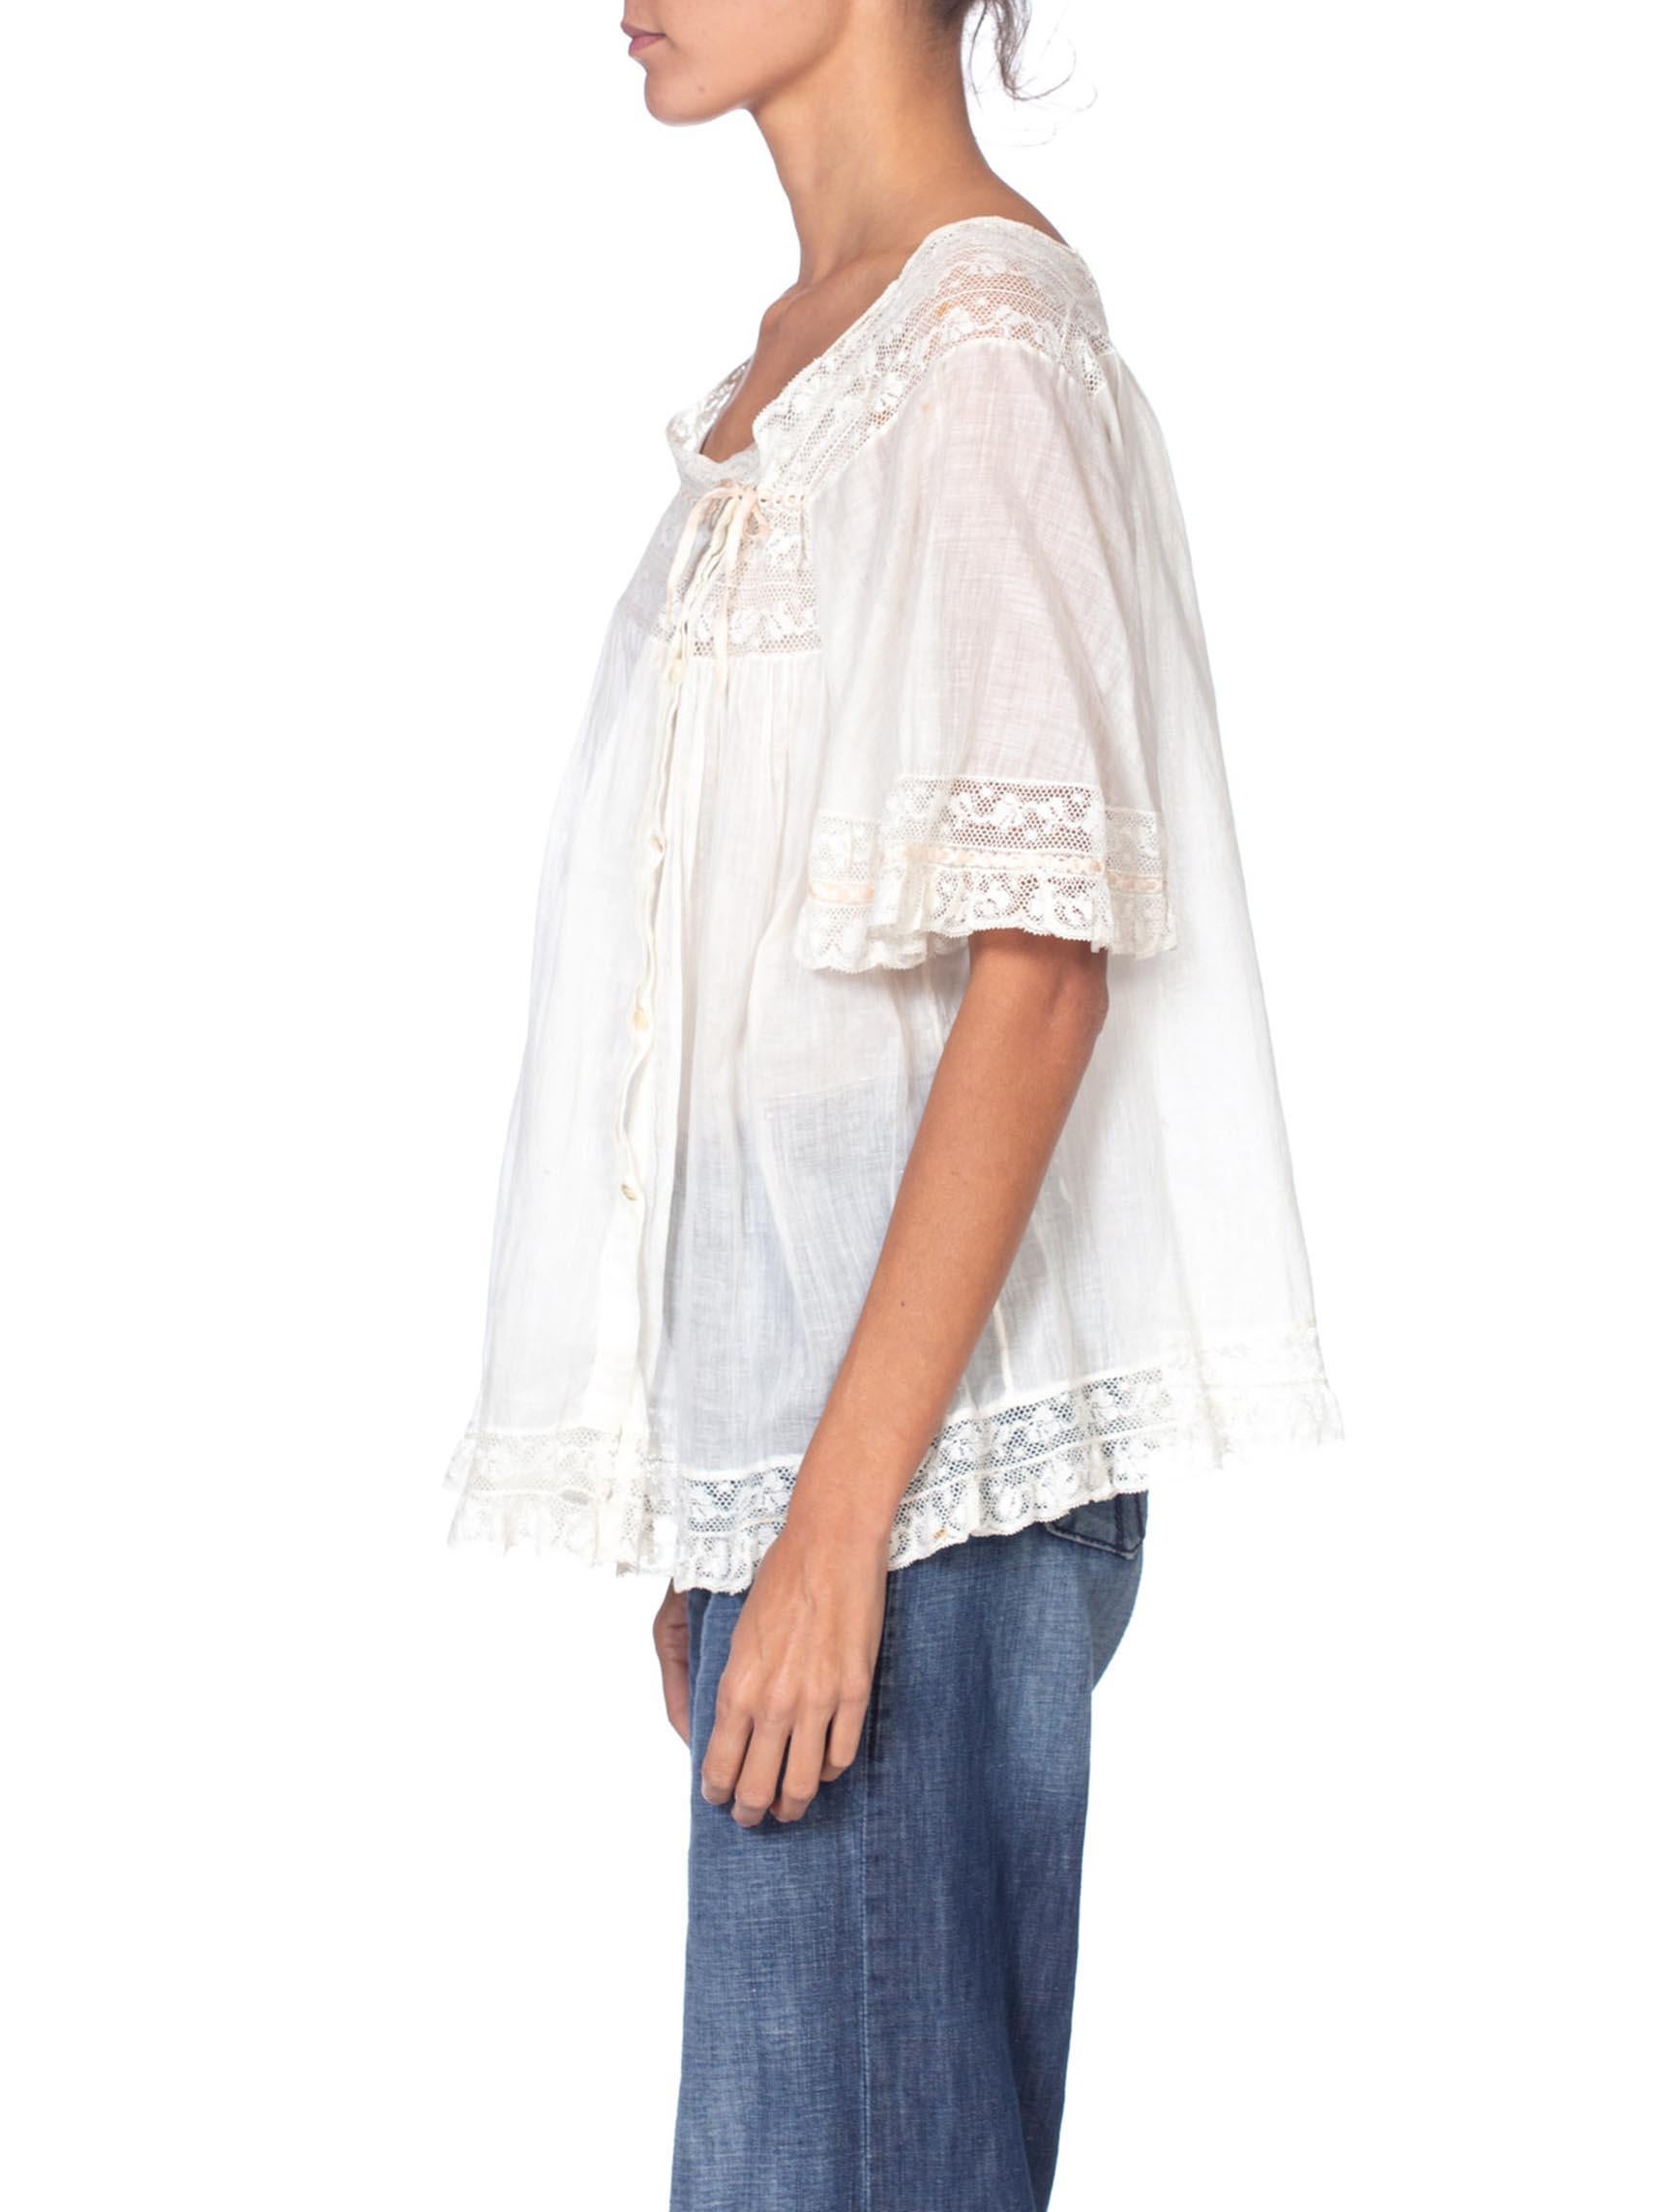 Gray Victorian White Cotton Voile & Lace Oversized Boho Bed Jacket Top